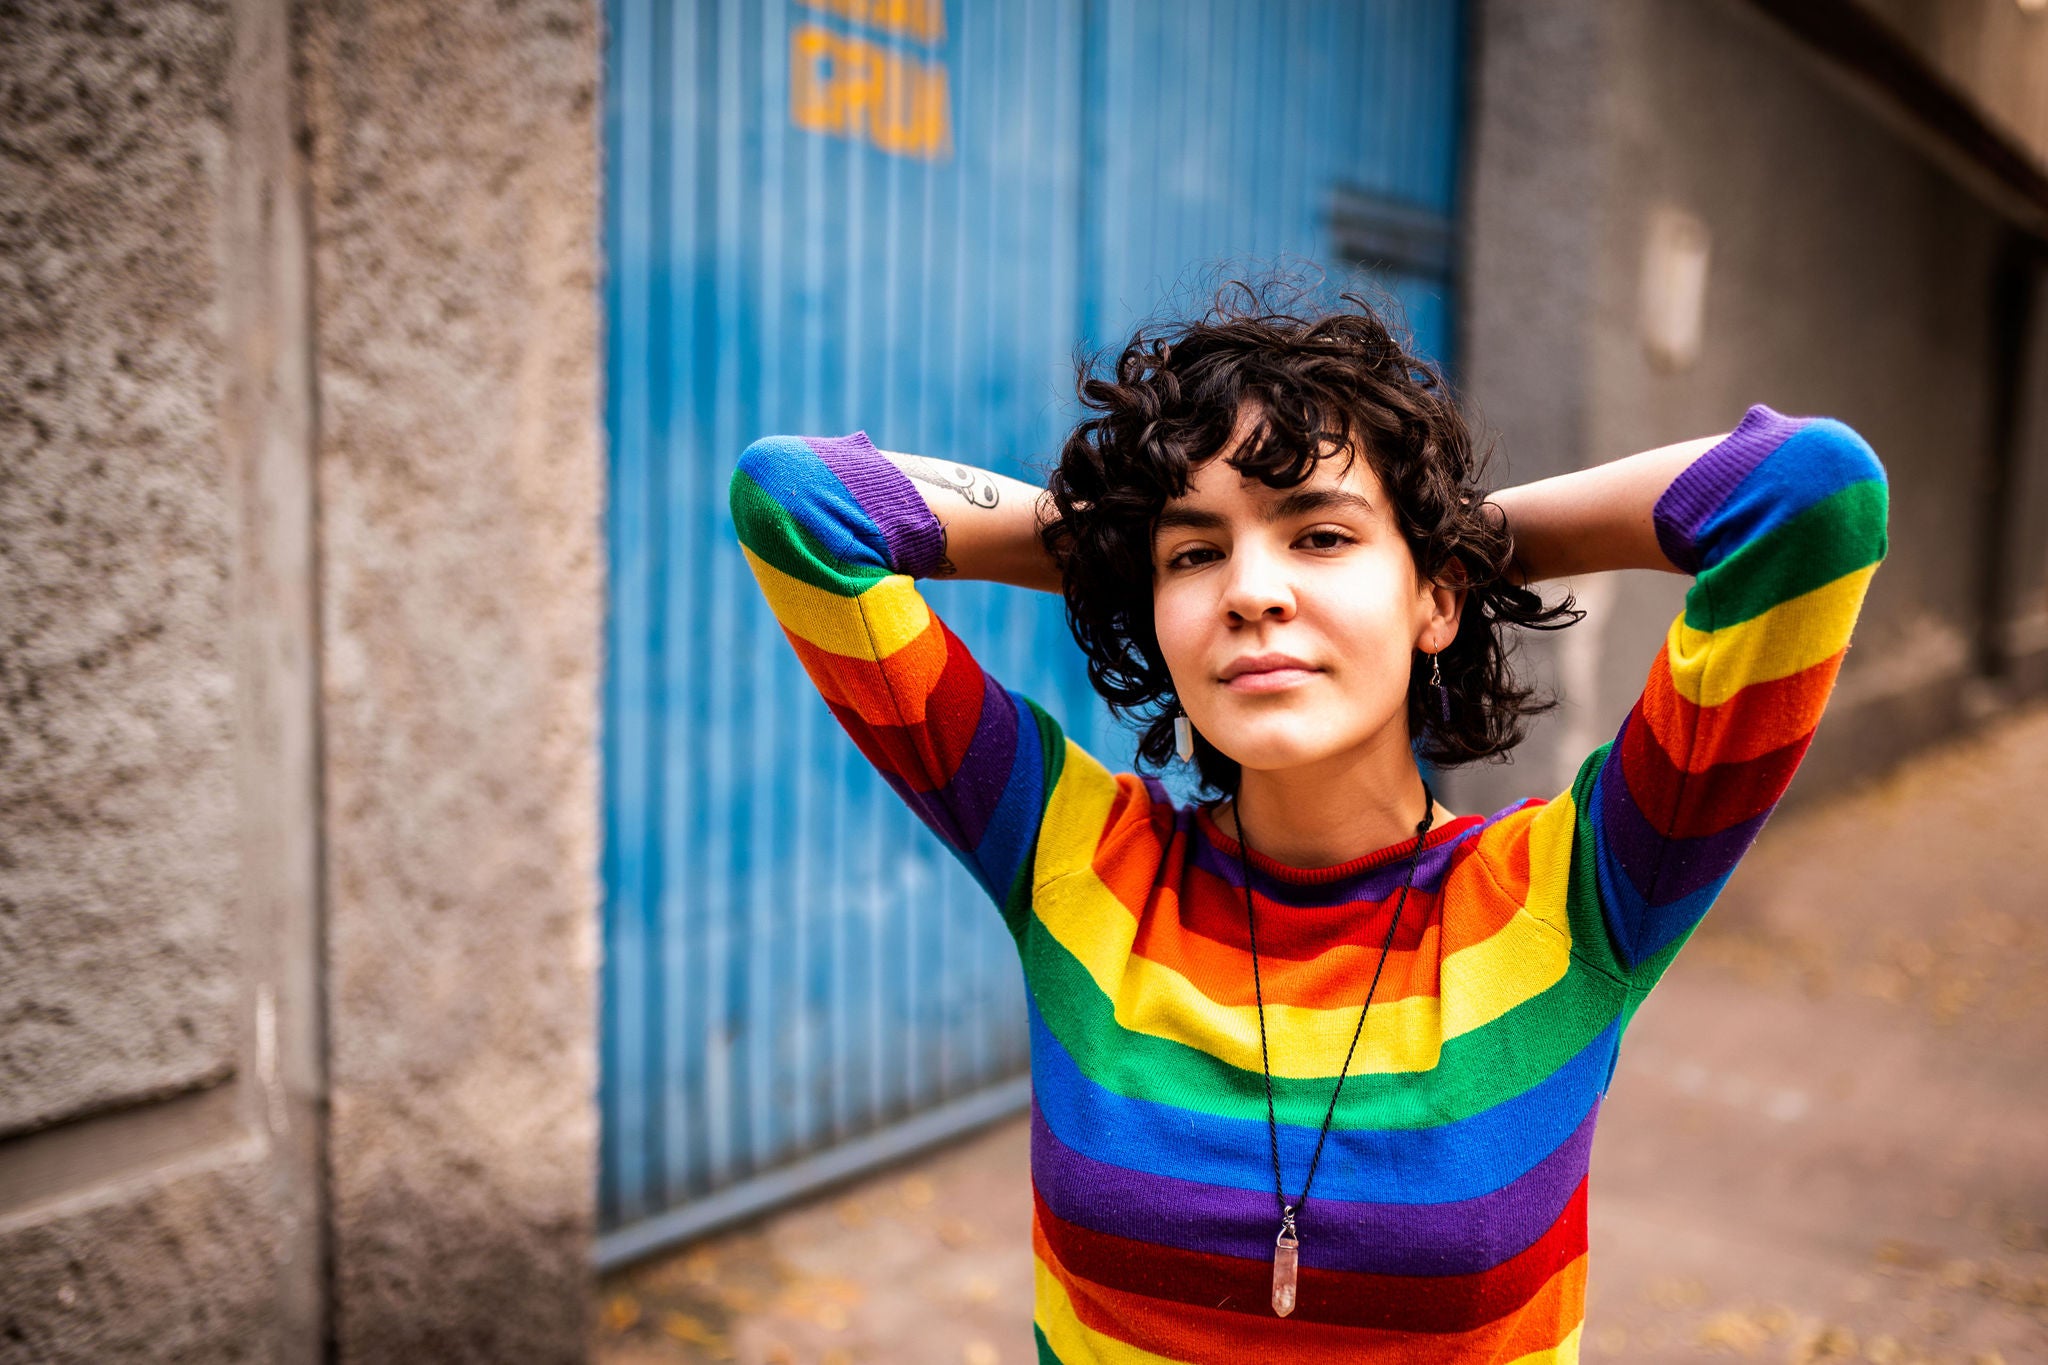 Portrait of a smiling Mexican woman wearing rainbow sweater